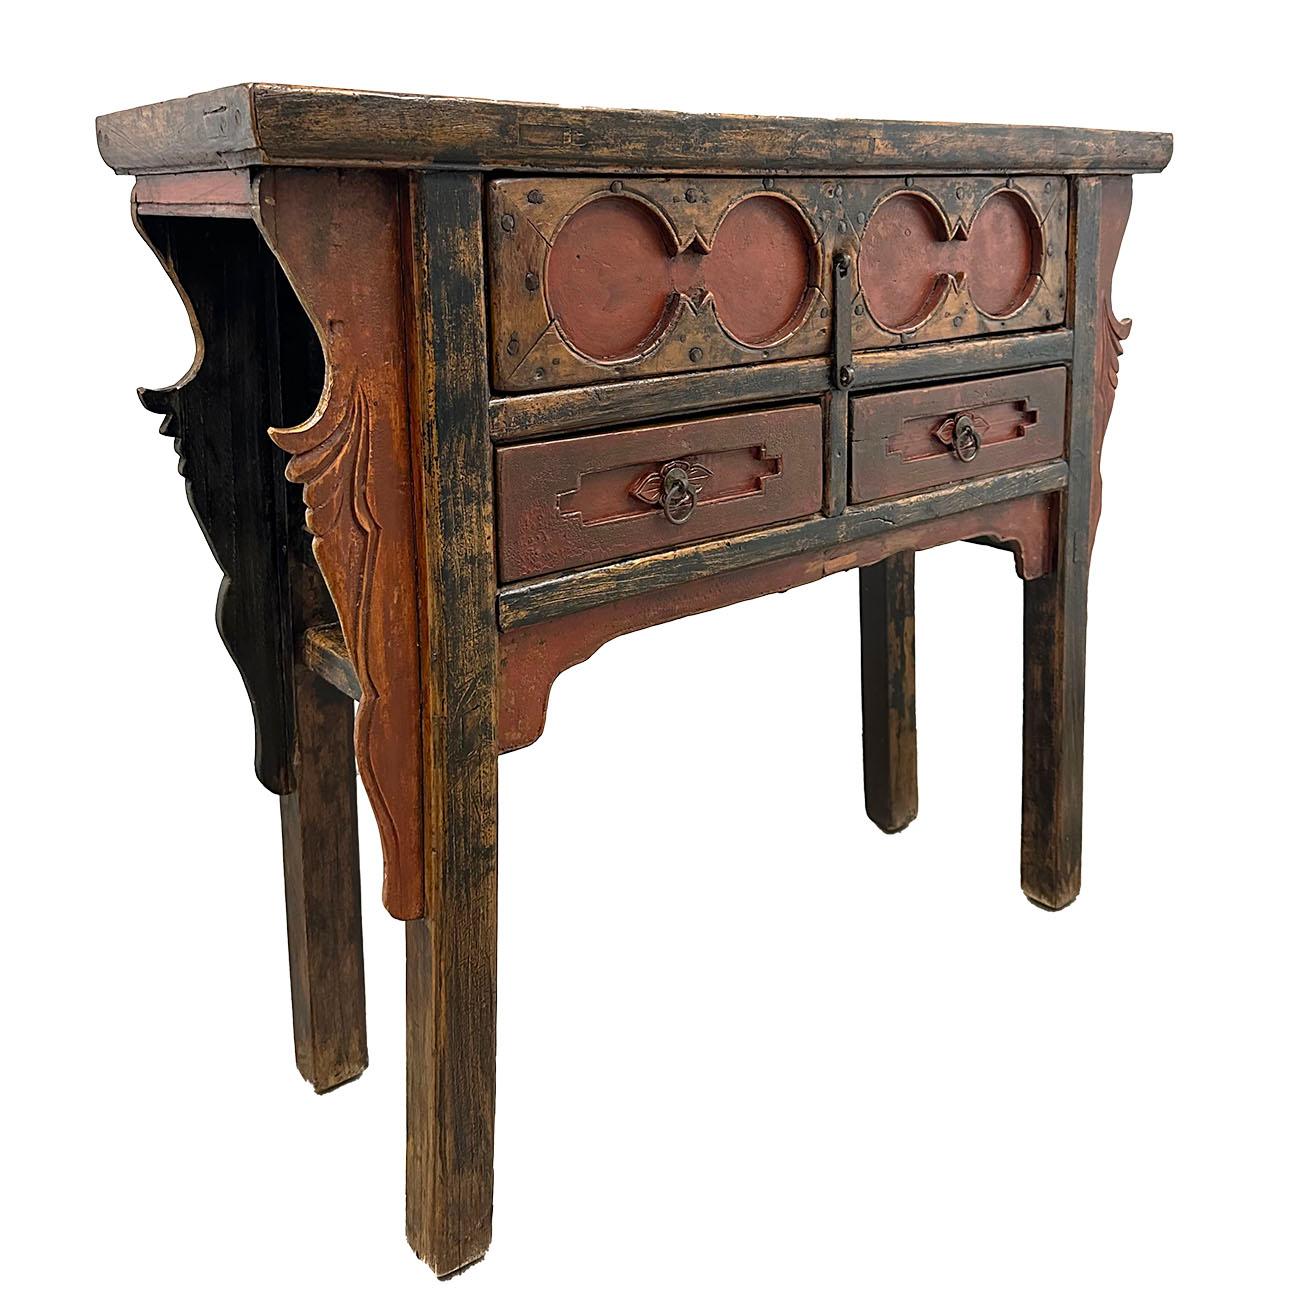 This beautiful antique carved console table has beautiful traditional detailed deep/raised carving works on the front drawers panel and legs. It features one big trunk drawer on the top and two drawers underneath. All drawers have beautiful